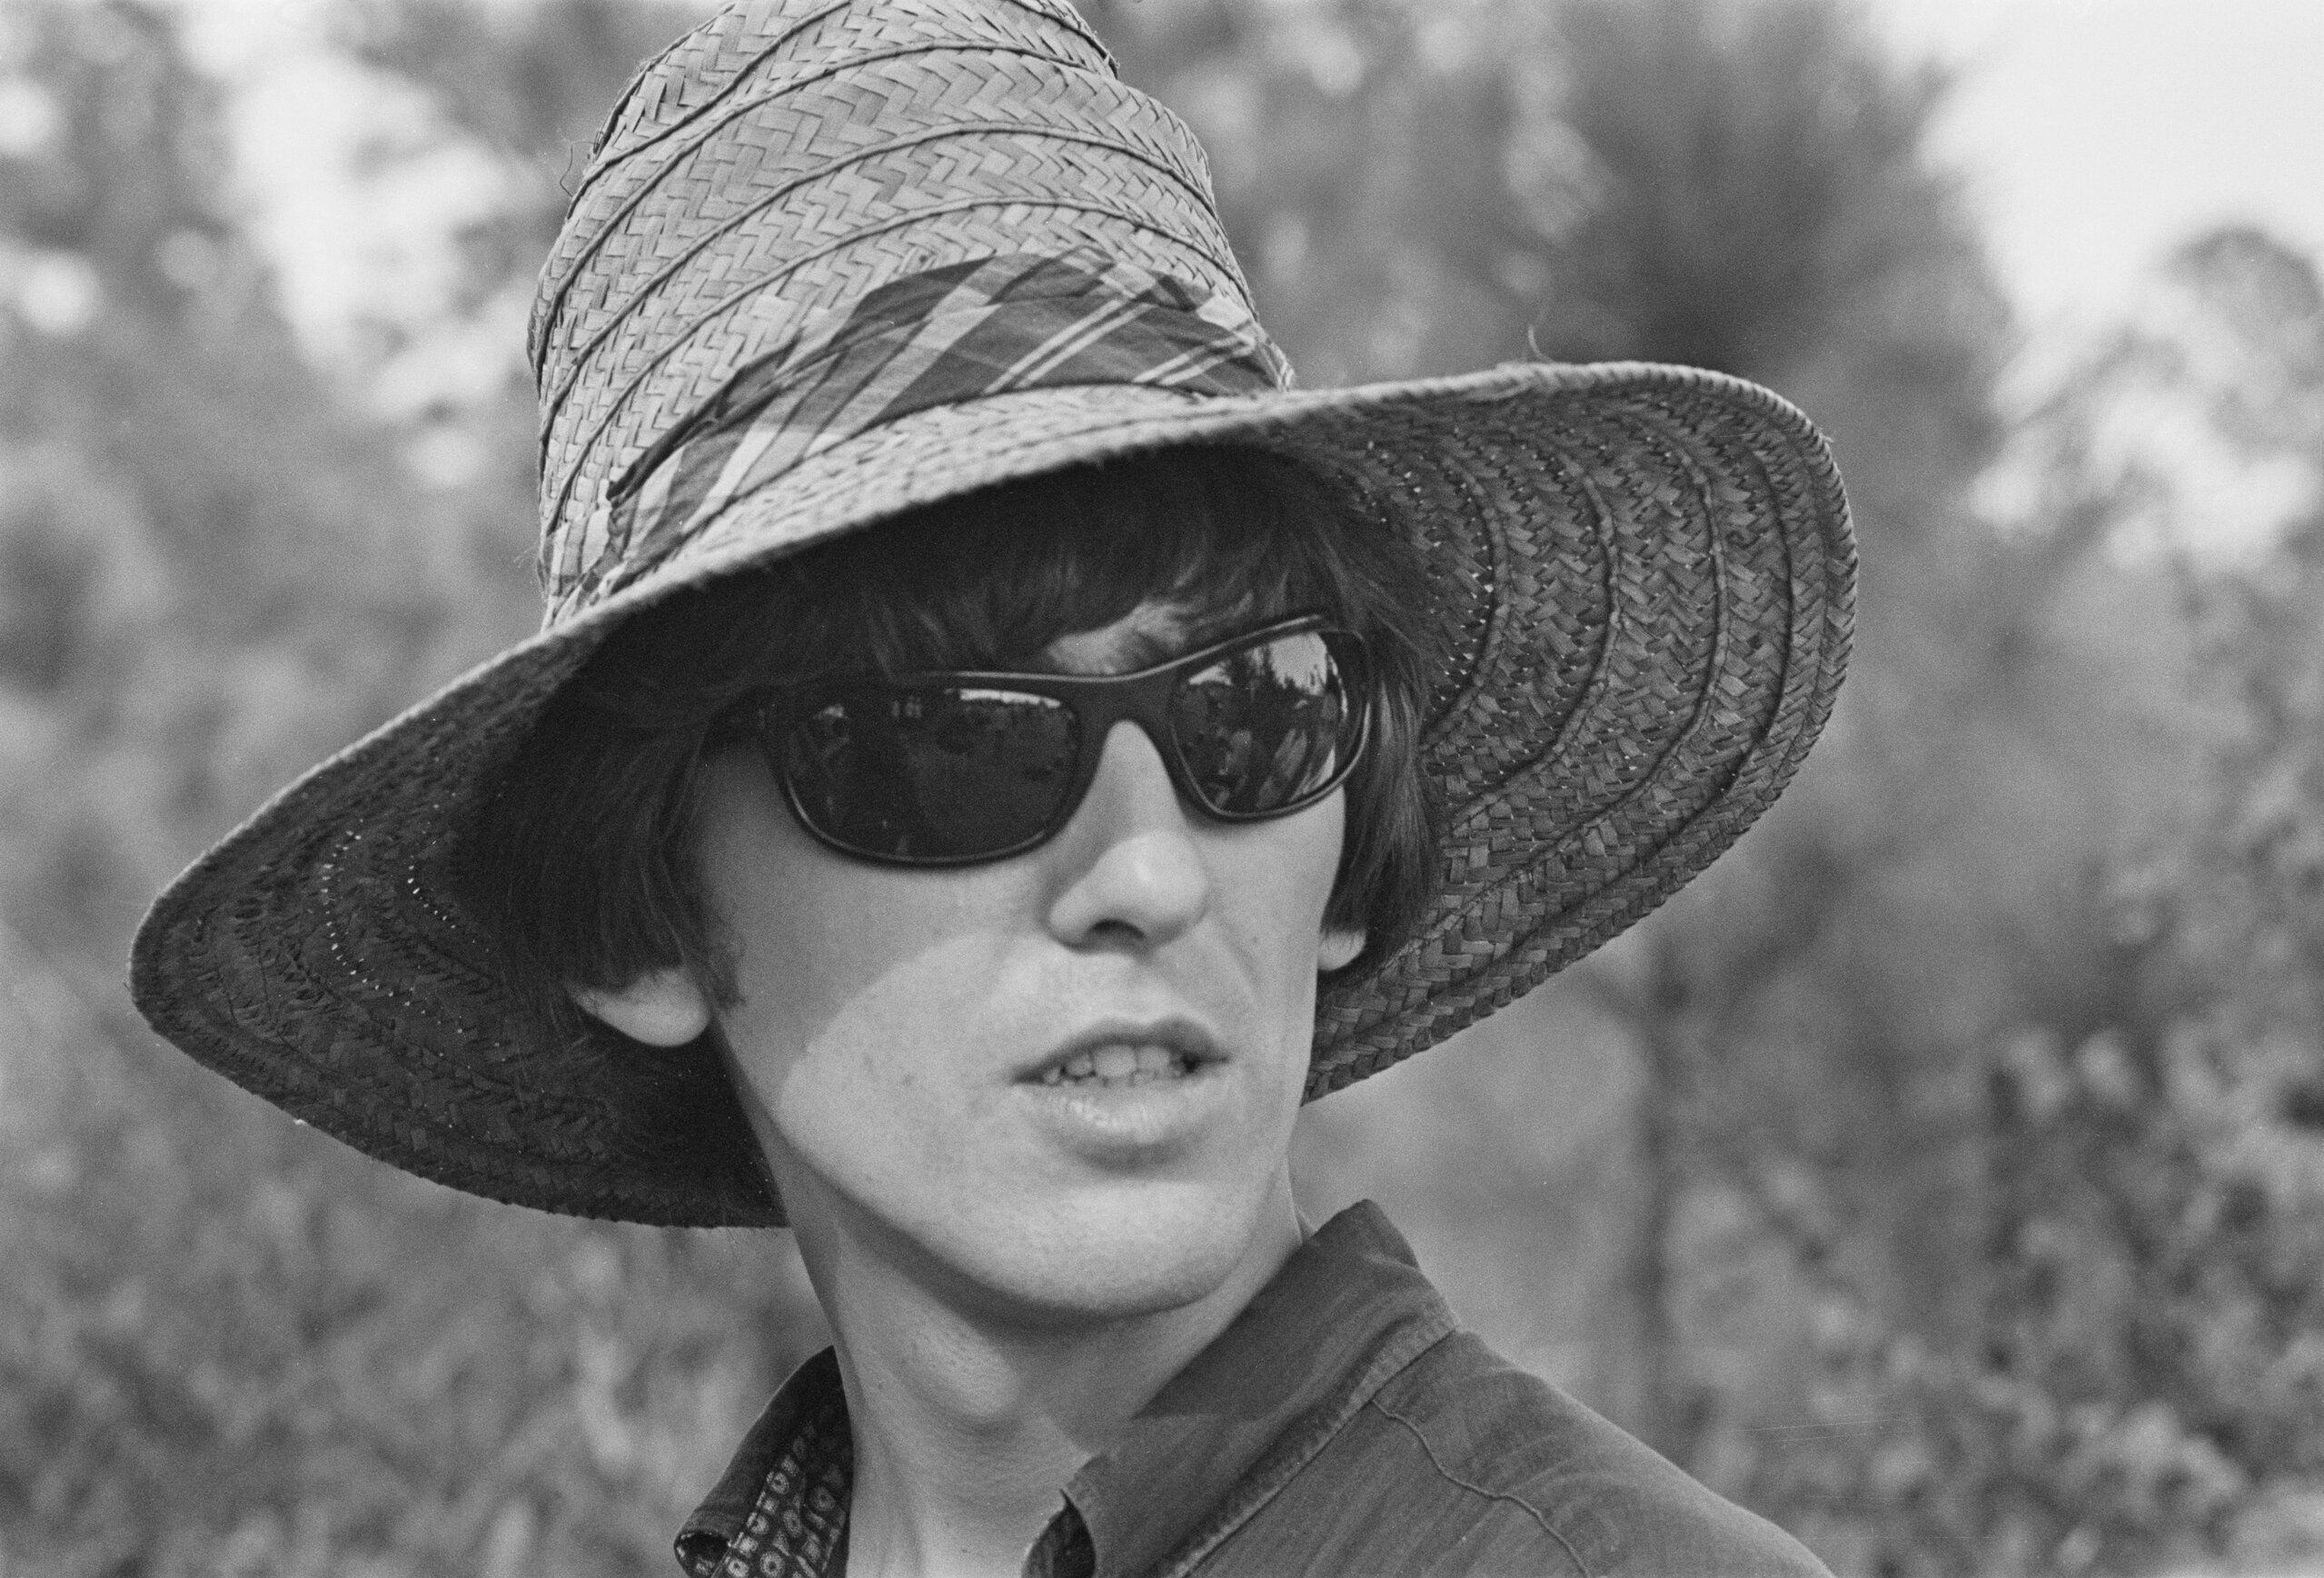 George Harrison in a straw hat and sunglasses, filming 'Help!' with The Beatles in the Bahamas.